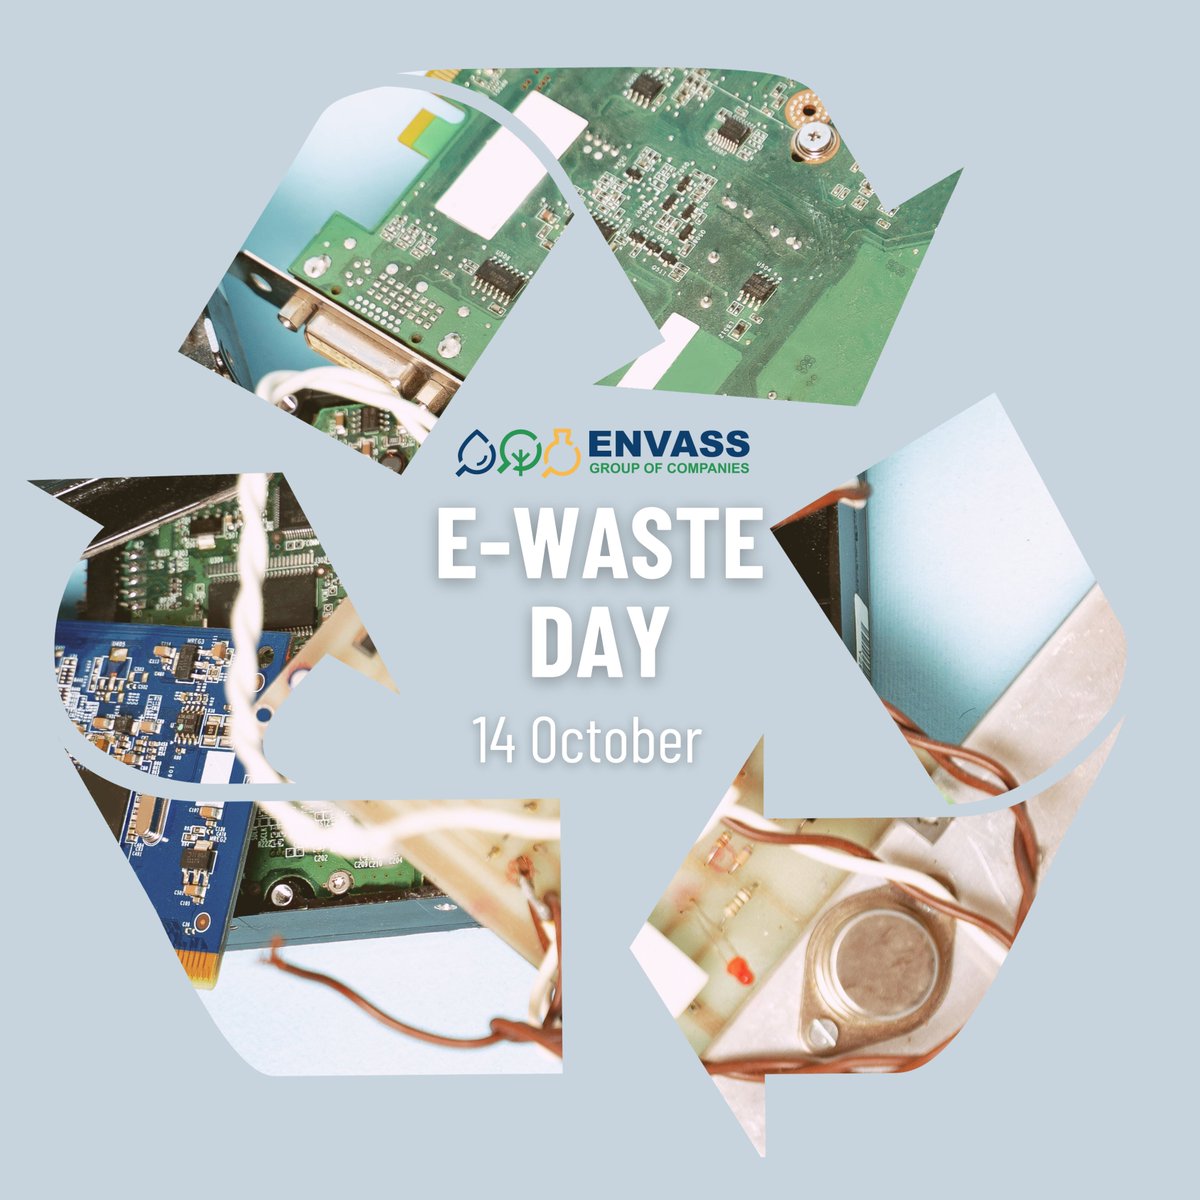 International E-Waste Day on 14th October serves as a platform for raising awareness about the e-waste issue

You can recycle anything with a plug, battery or cable! 

#ewasteday #ewaste #recycling #zerowaste #greenmatters #learngreen #livegreen #recycle